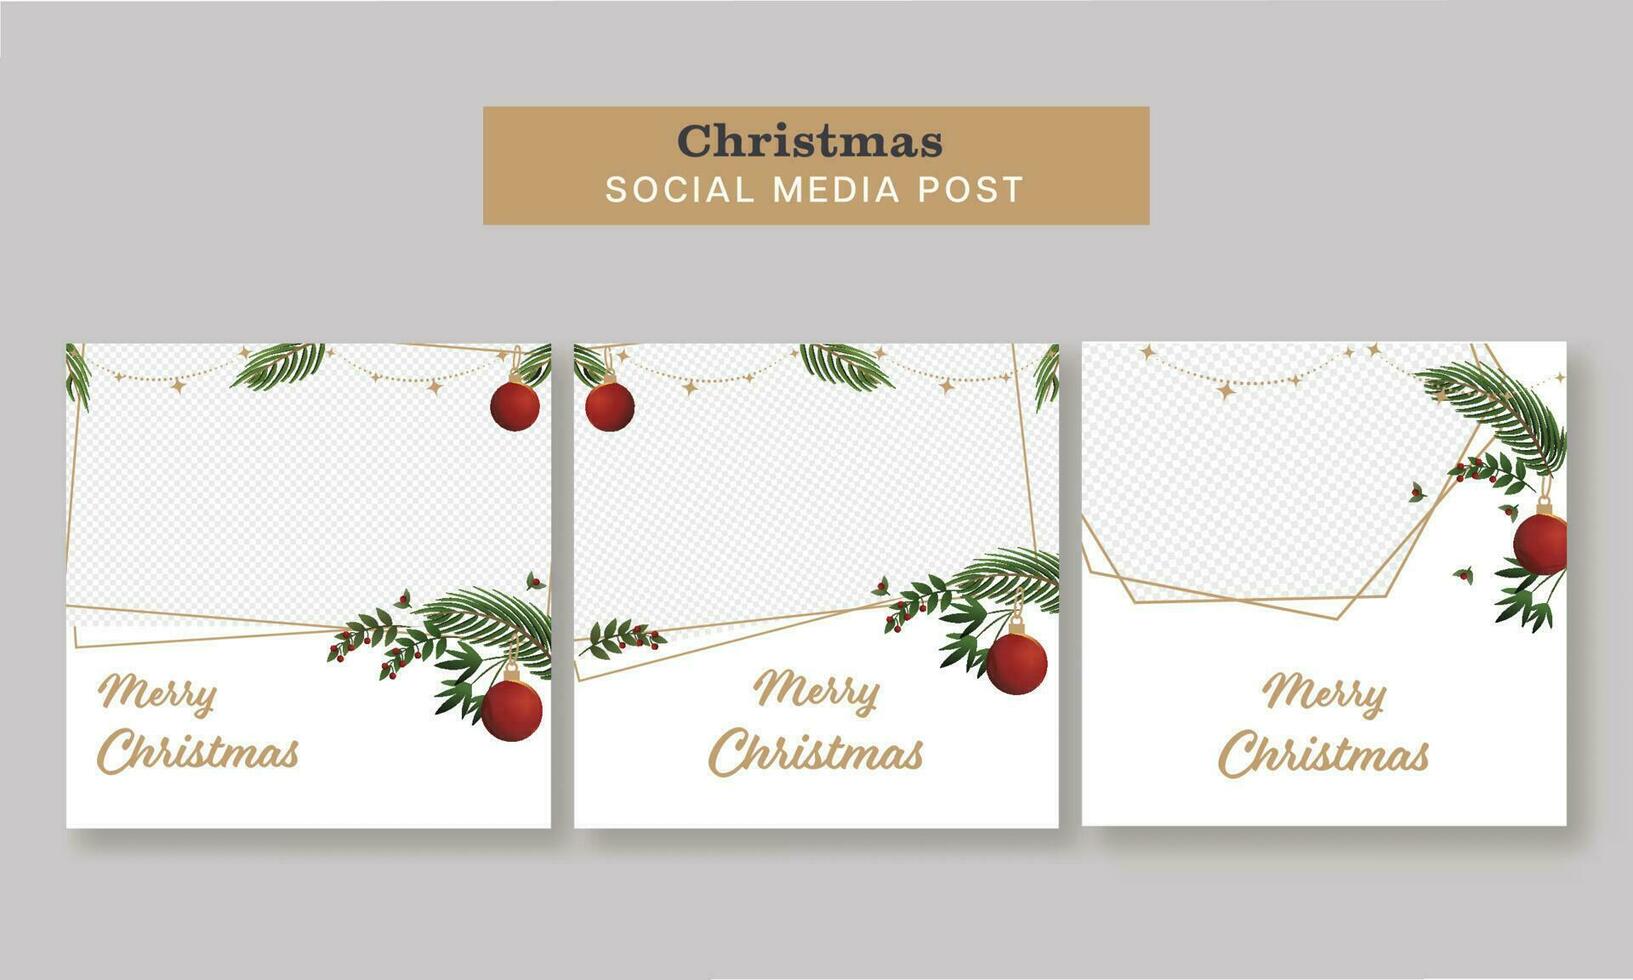 Merry Christmas Social Media Post Or Template Set With Baubles Hang, Fir Leaves, Berry Stem And Copy Space On White Background. vector